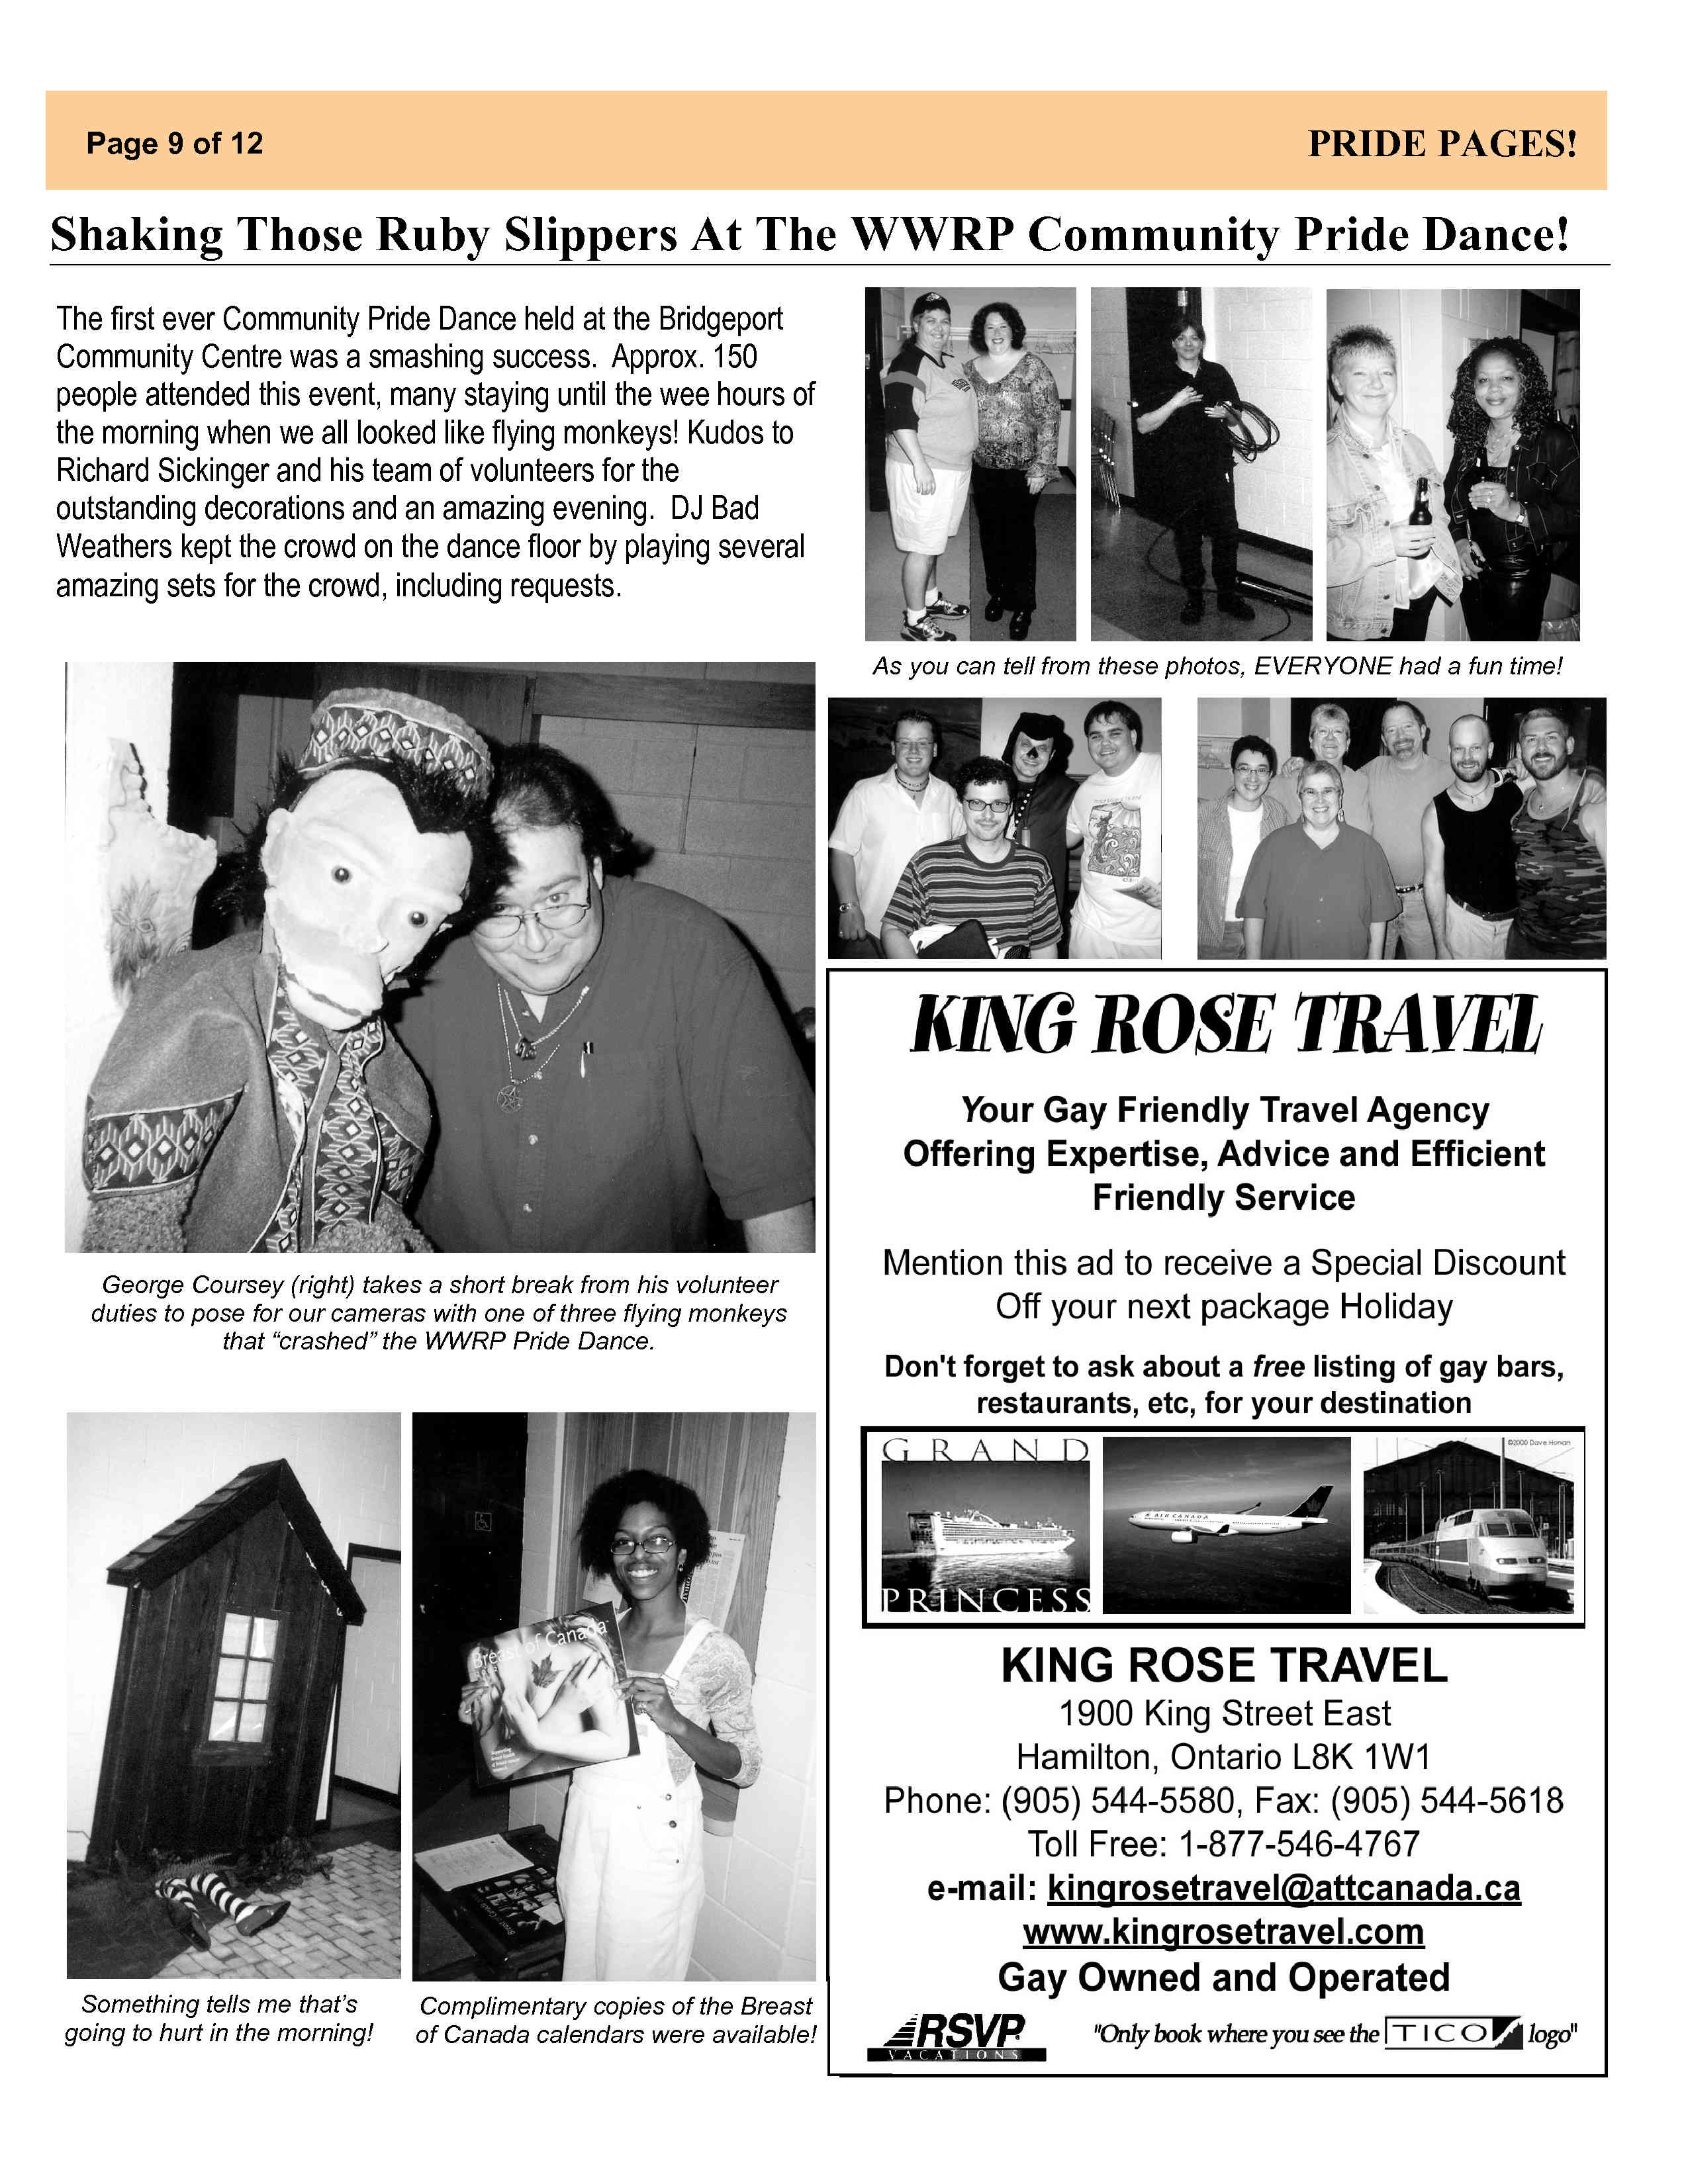 Pride Pages 2002-07 p9